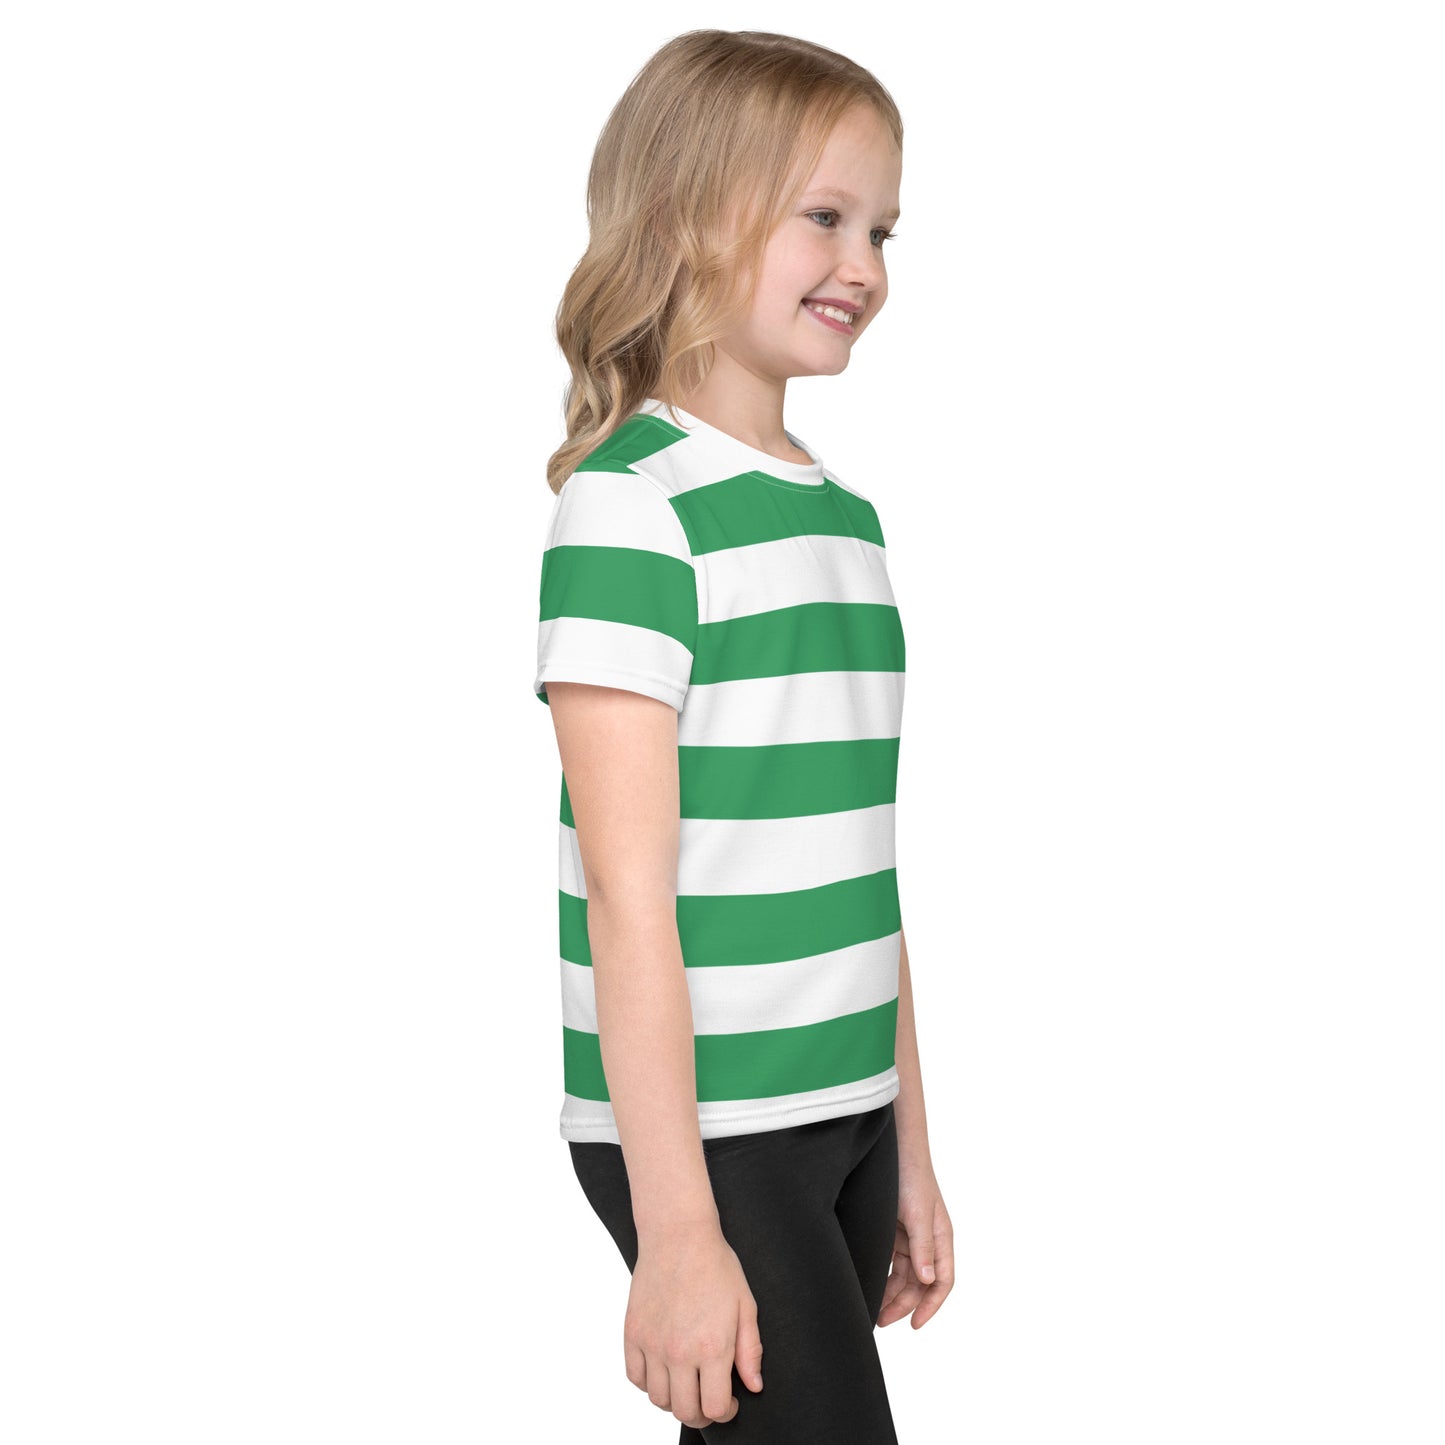 Sailor Green - Sustainably Made Kids T-Shirt